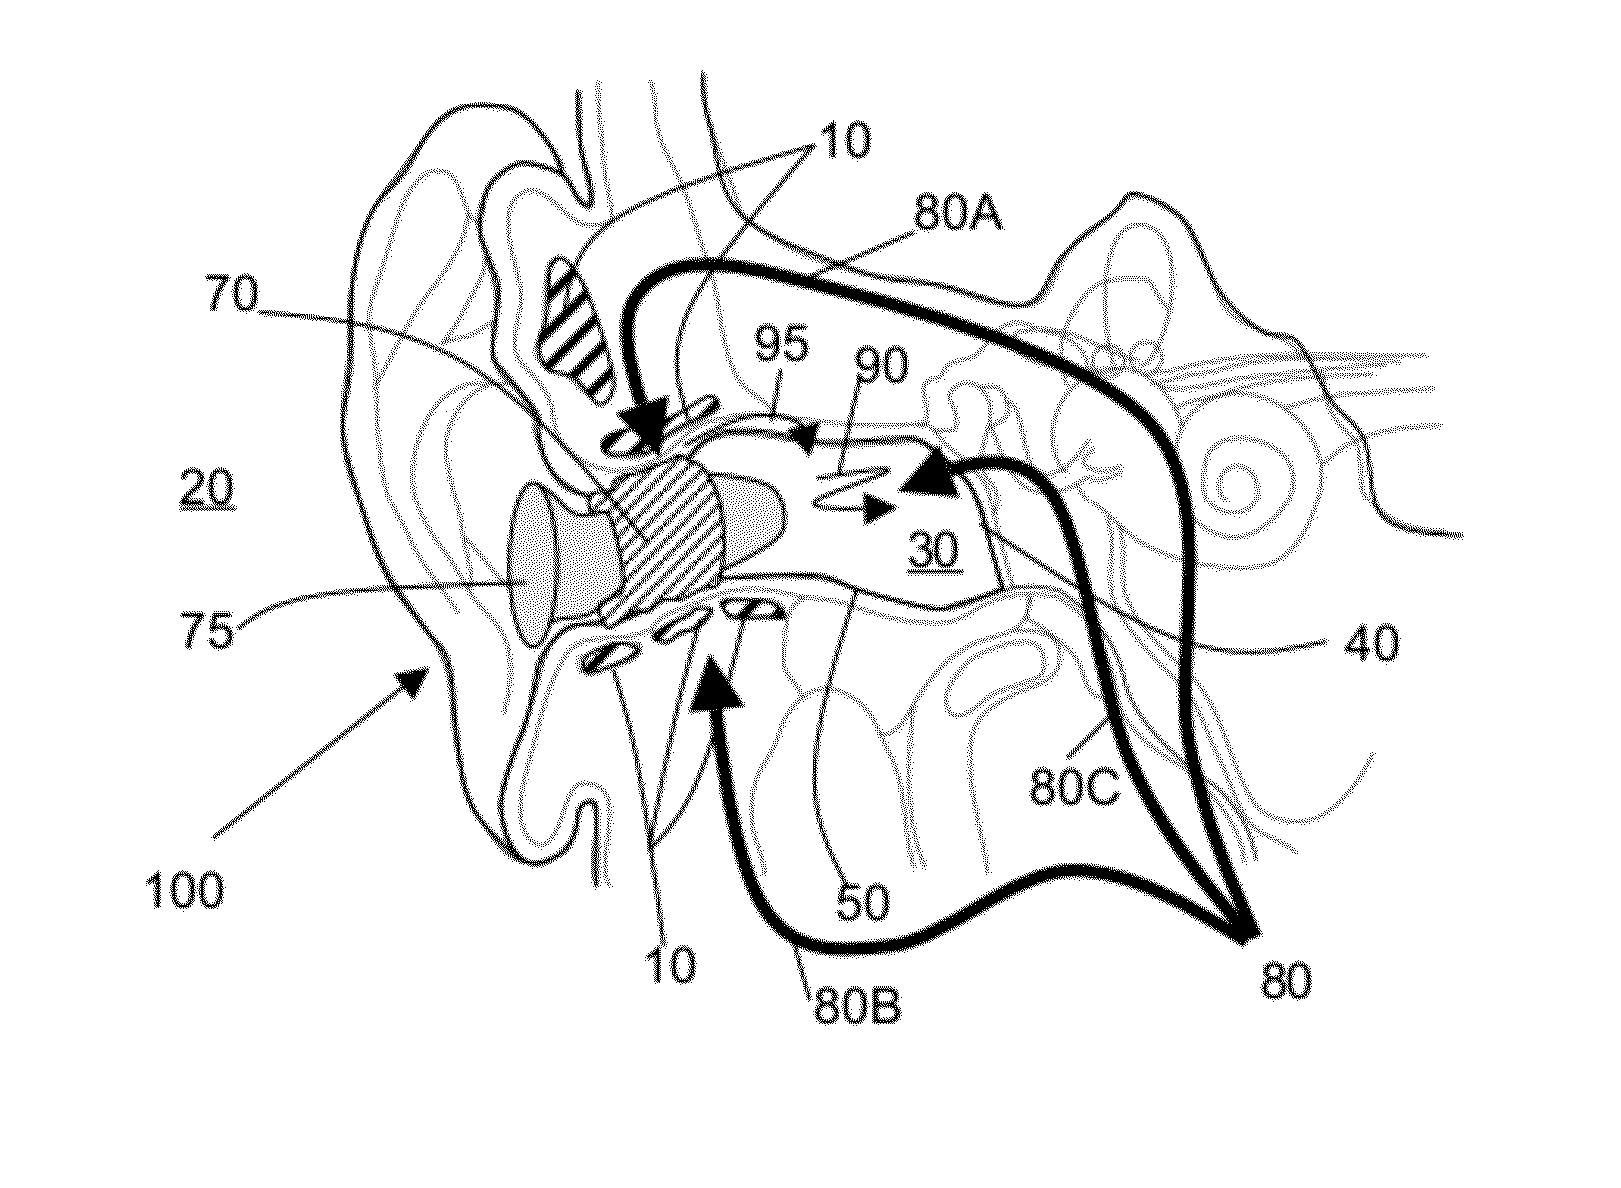 Occlusion effect mitigation and sound isolation device for orifice inserted systems